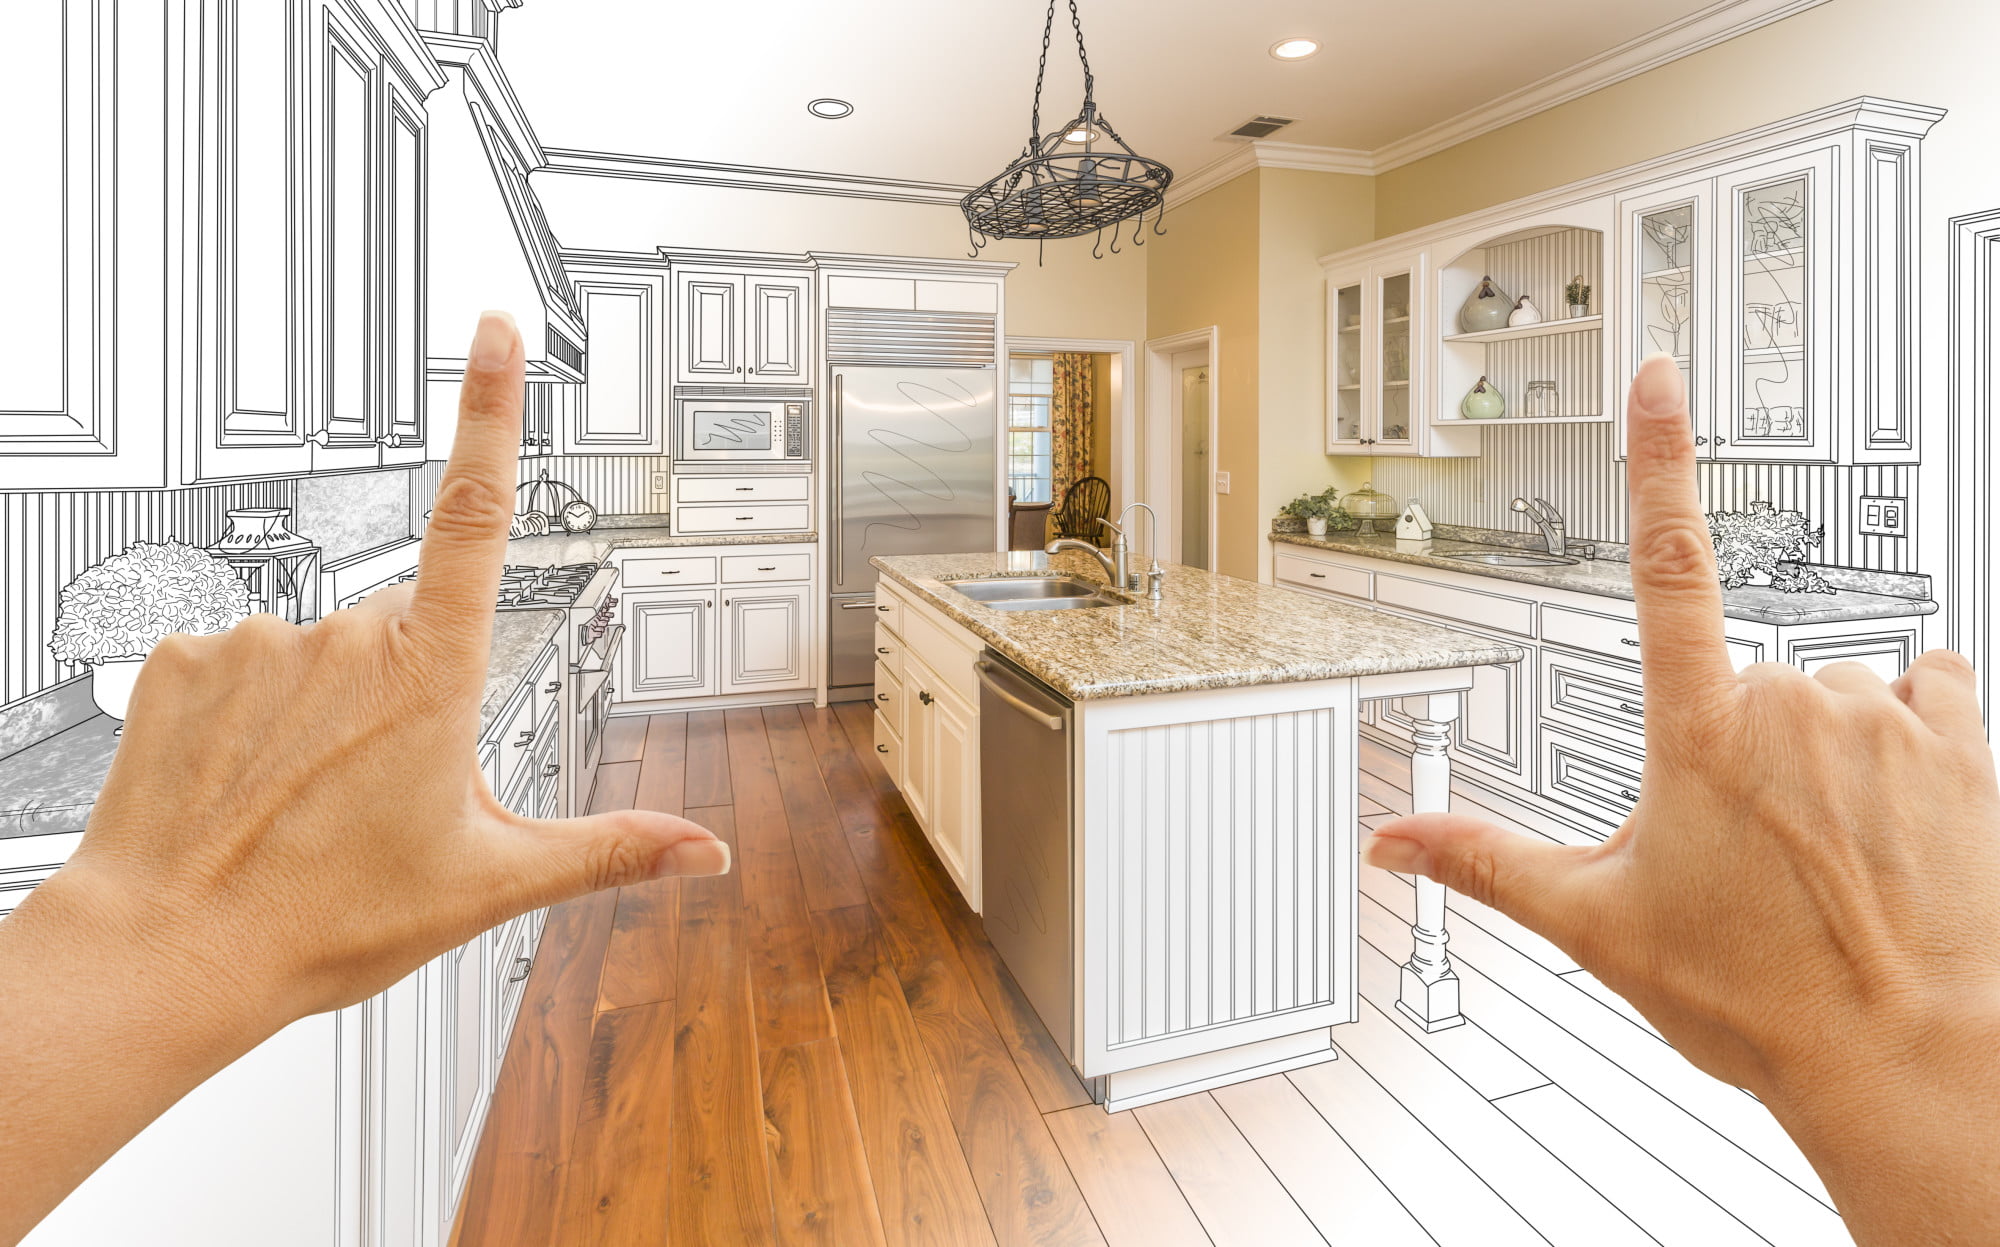 Have you been debating on what home improvements to invest in this year? Then you'll want to consider these home upgrades, which can also save you money!